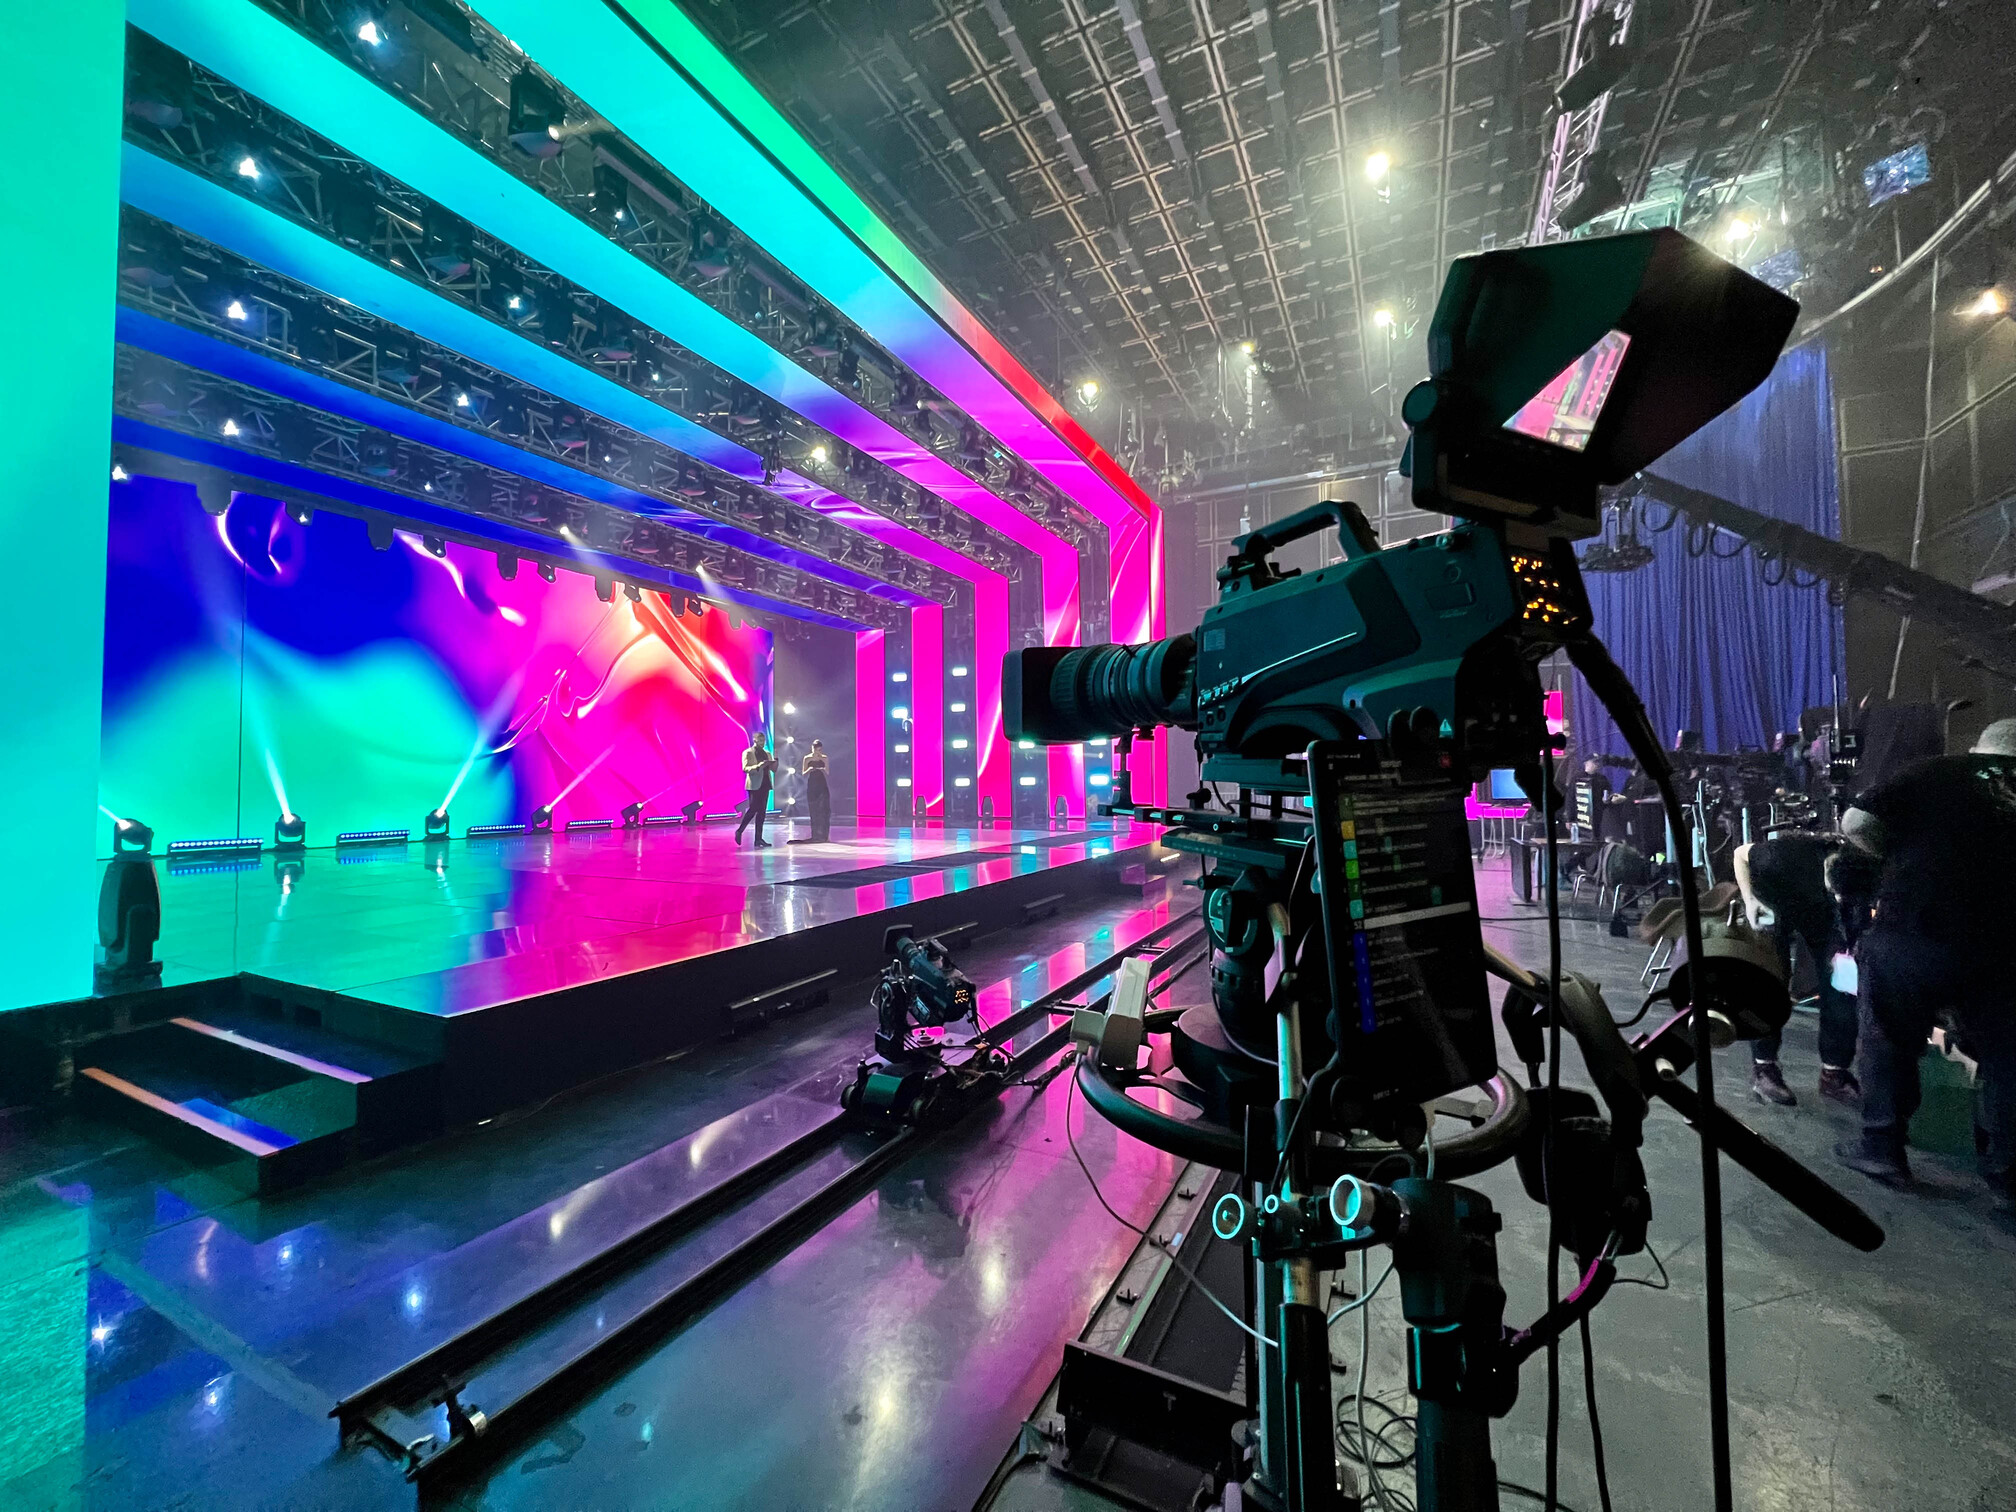 Skymusic on the "Eurovision Song 2023" festival second year in a row